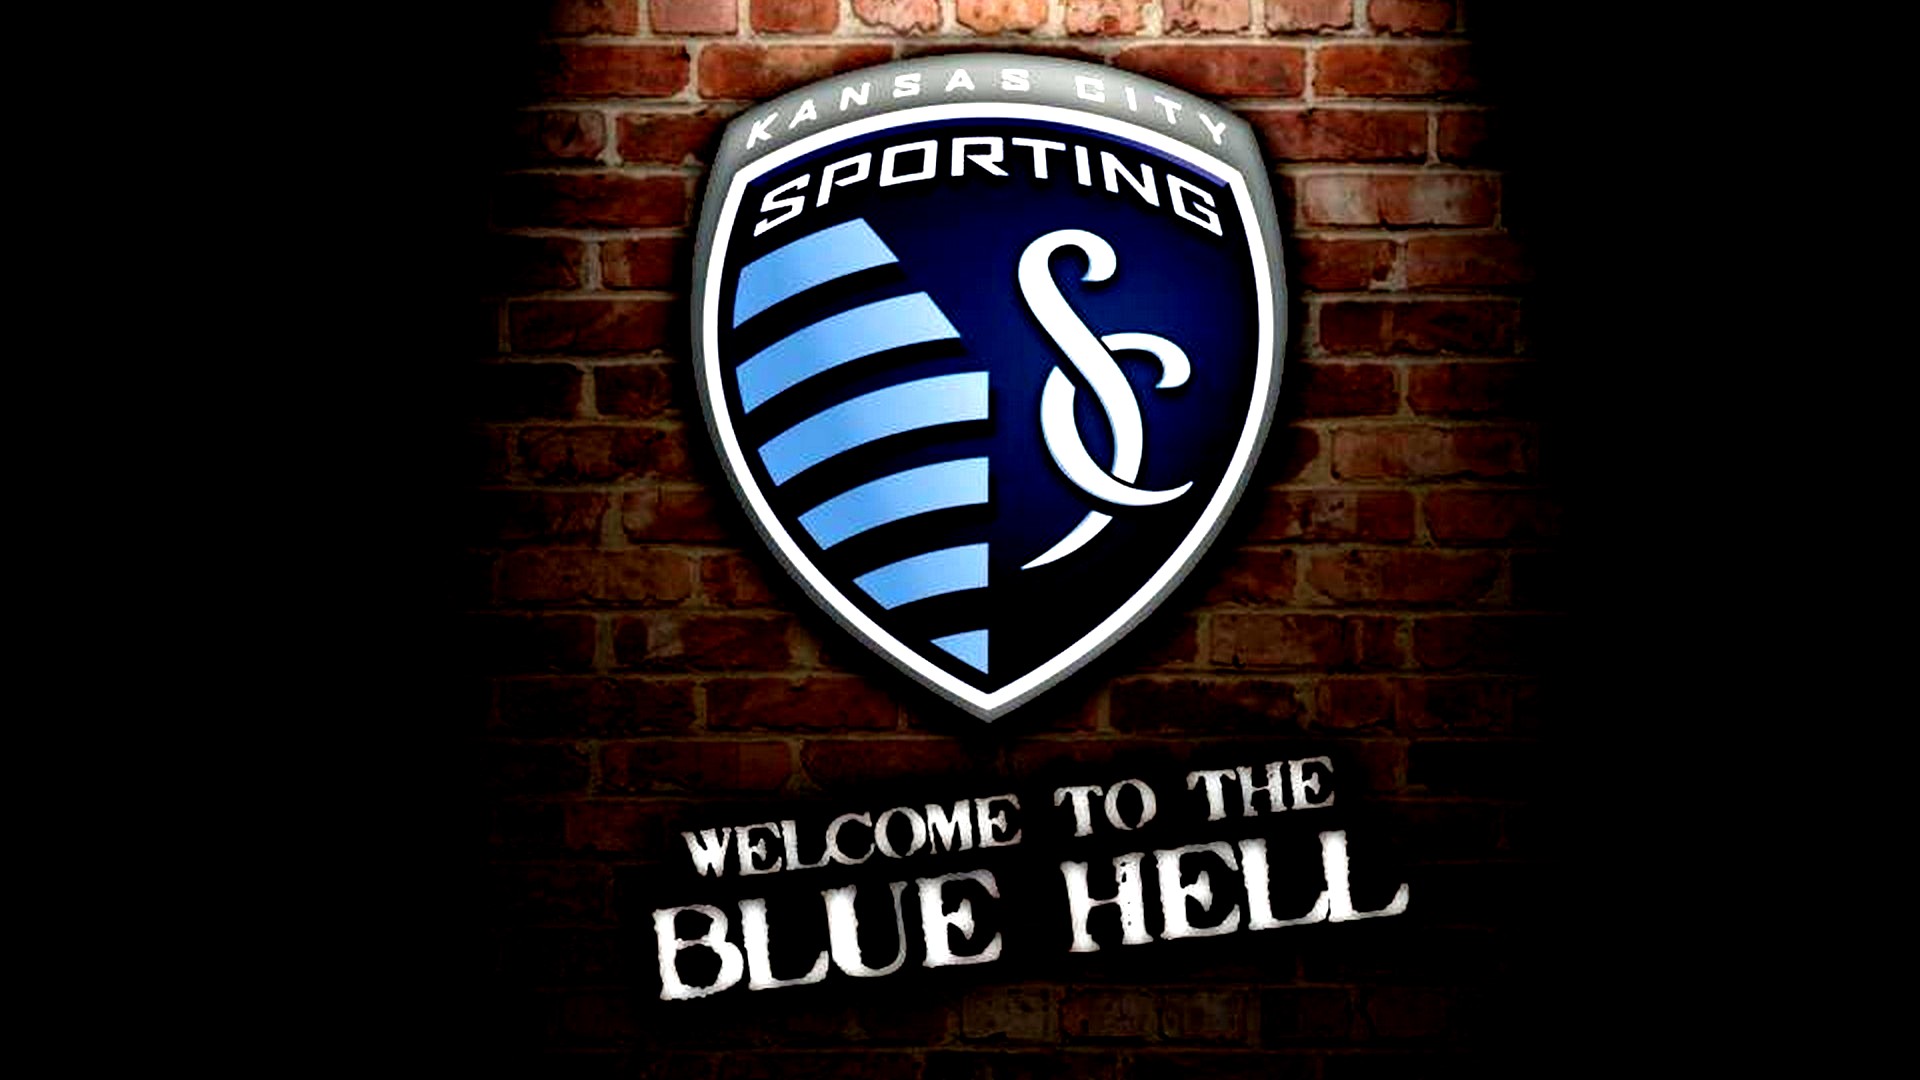 Best Sporting Kansas City Desktop Wallpapers with high-resolution 1920x1080 pixel. You can use this wallpaper for your Desktop Computers, Mac Screensavers, Windows Backgrounds, iPhone Wallpapers, Tablet or Android Lock screen and another Mobile device